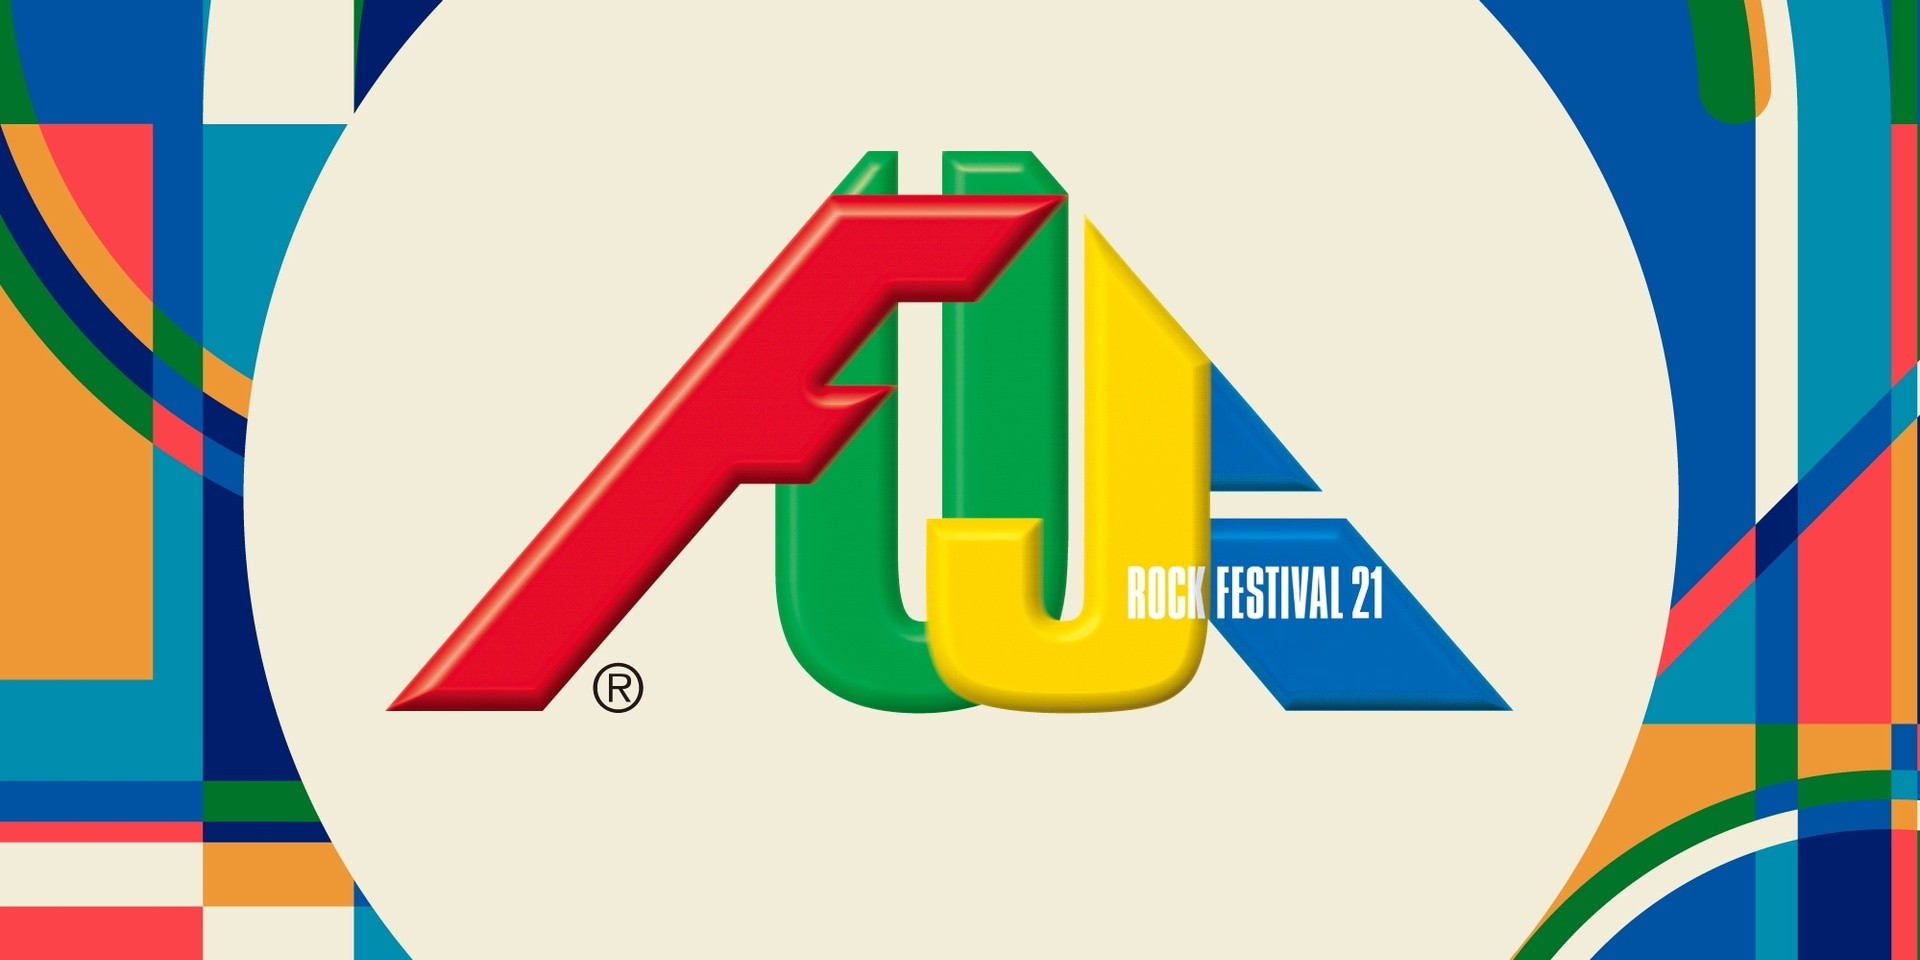 Here's how you can watch Fuji Rock Festival '21 online